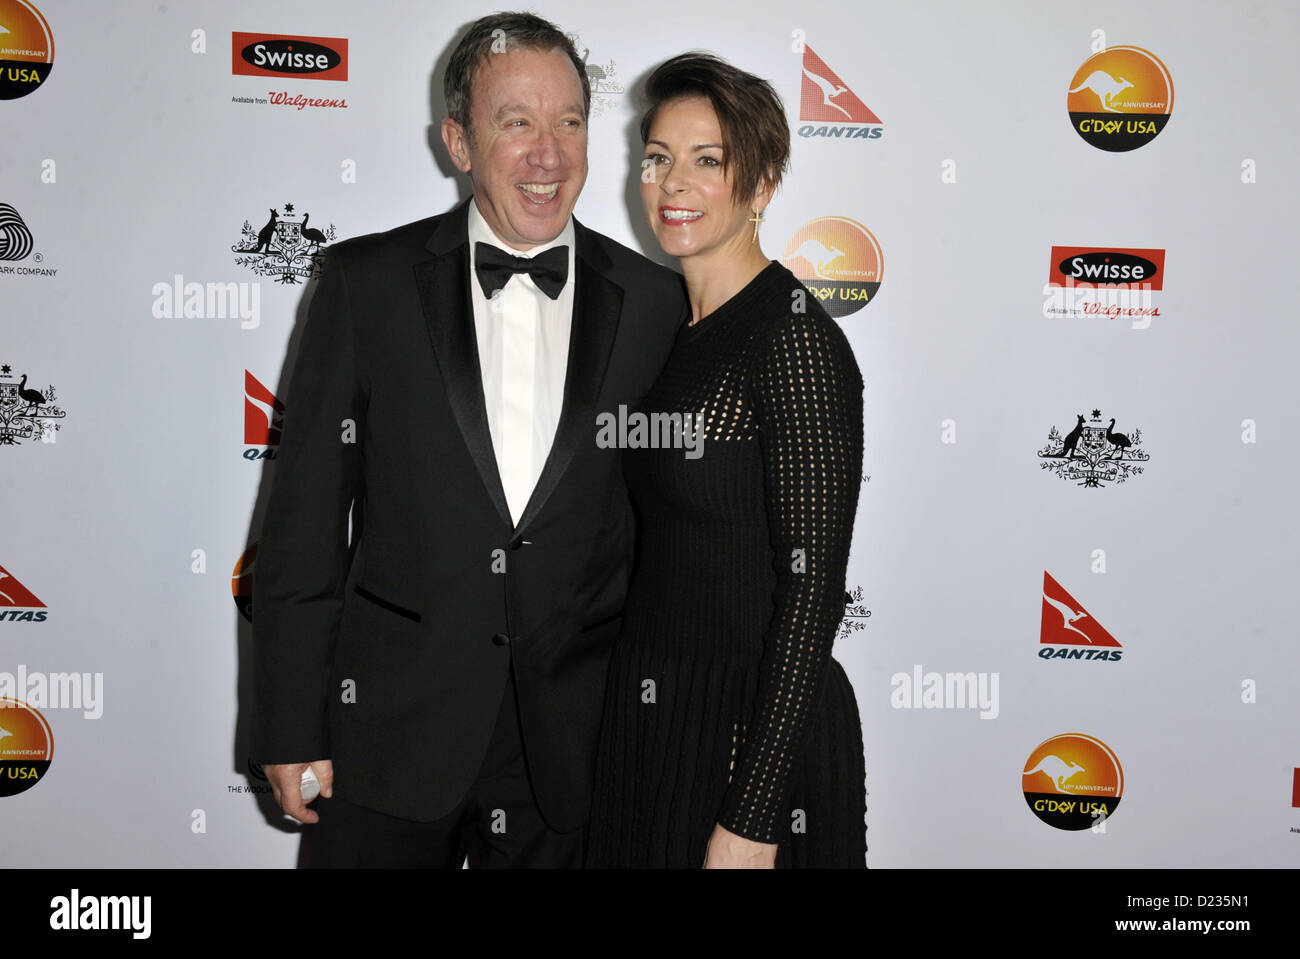 Jan. 12, 2013 - Los Angeles, California, U.S. - Tim Allen attending the 2013 G'Day USA Los Angeles Black Tie Gala held at the JW Marriot at LA Live in Los Angeles, California on January 12, 2013. 2013(Credit Image: Credit:  D. Long/Globe Photos/ZUMAPRESS.com/Alamy Live News) Stock Photo